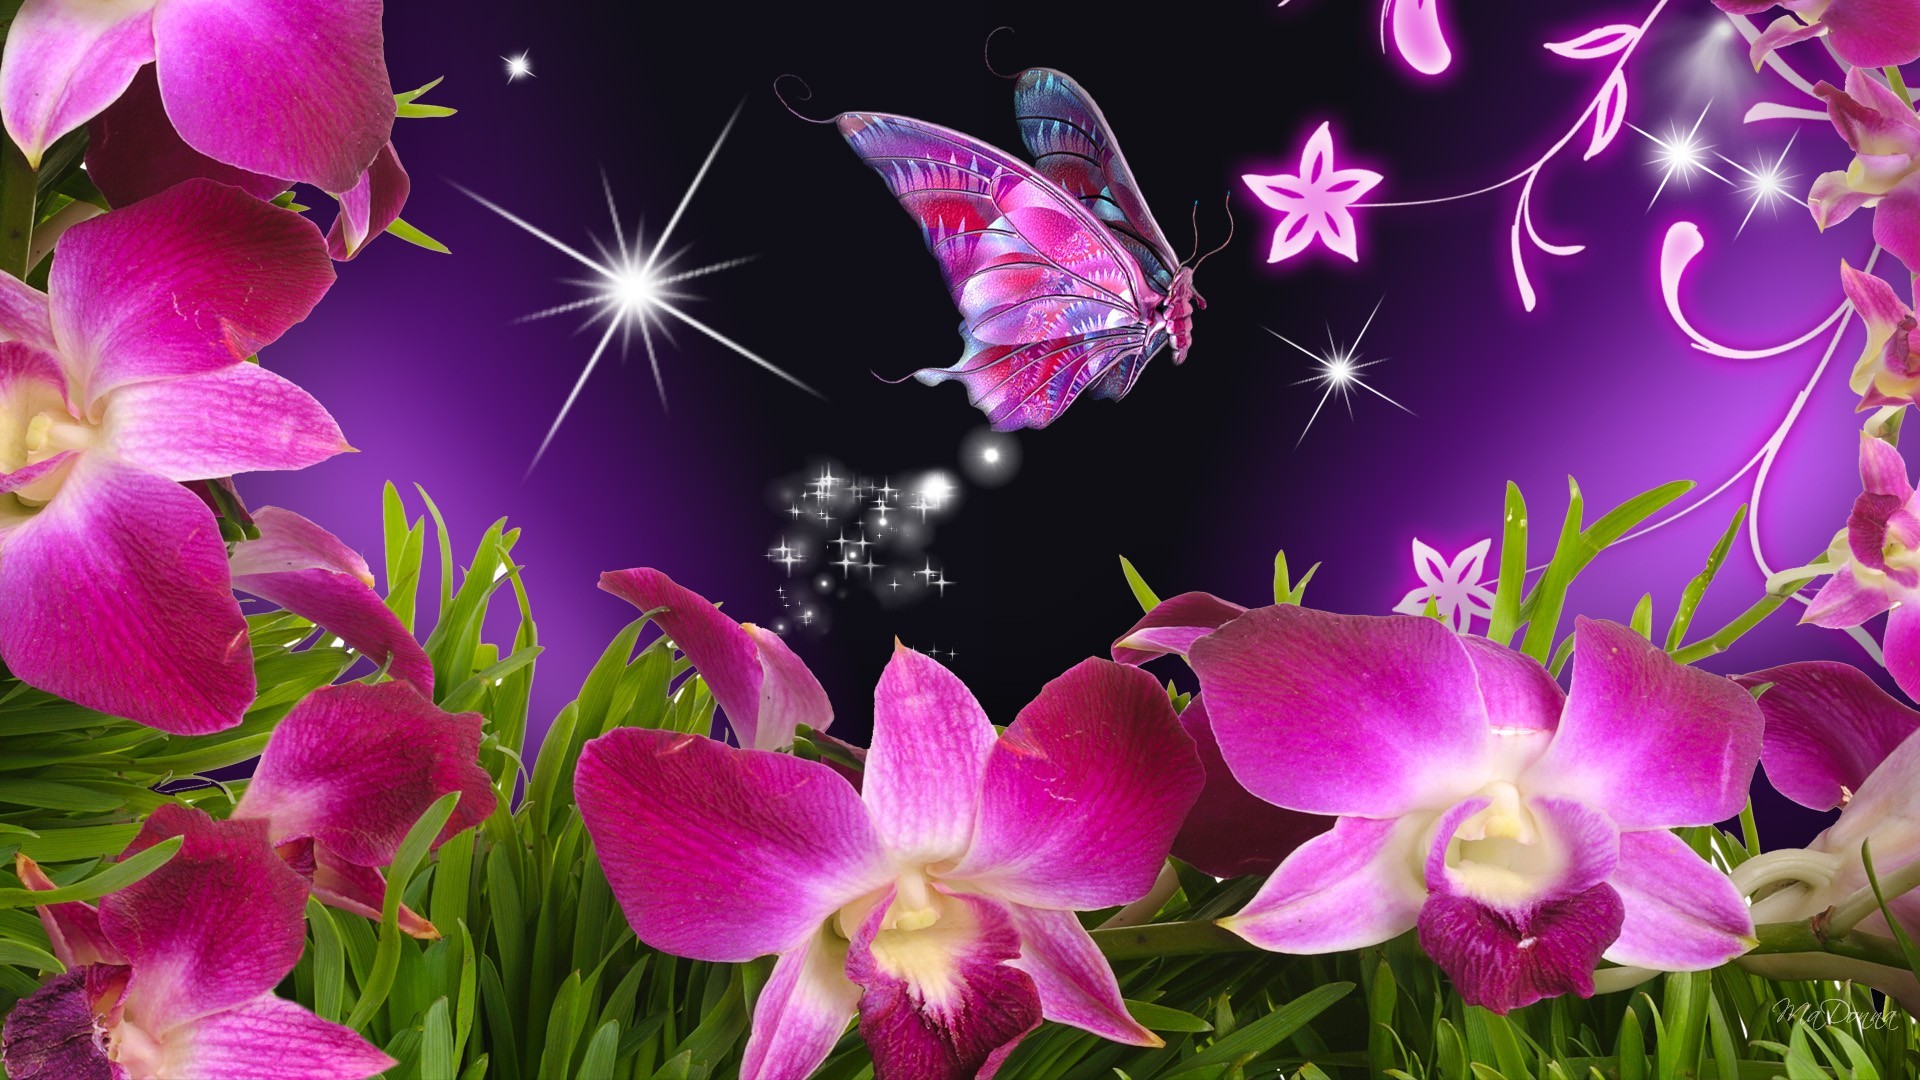 1920x1080 butterflies and flowers | Butterfly Flowers Orchid Purple Stars Vines Free  Hd Wallpapers